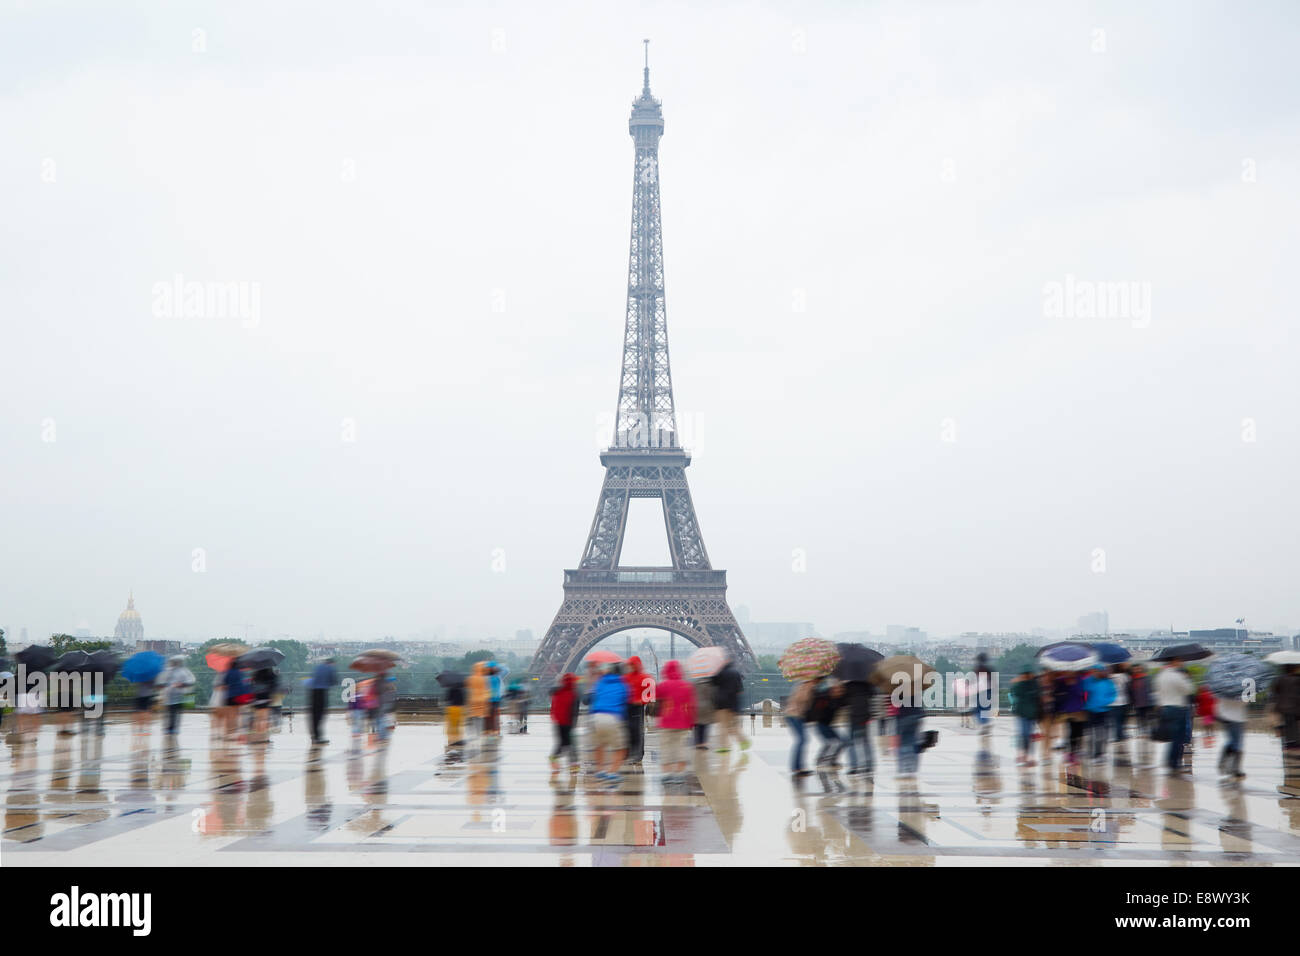 Eiffel tower in Paris with tourists and rain from Trocadero Stock Photo